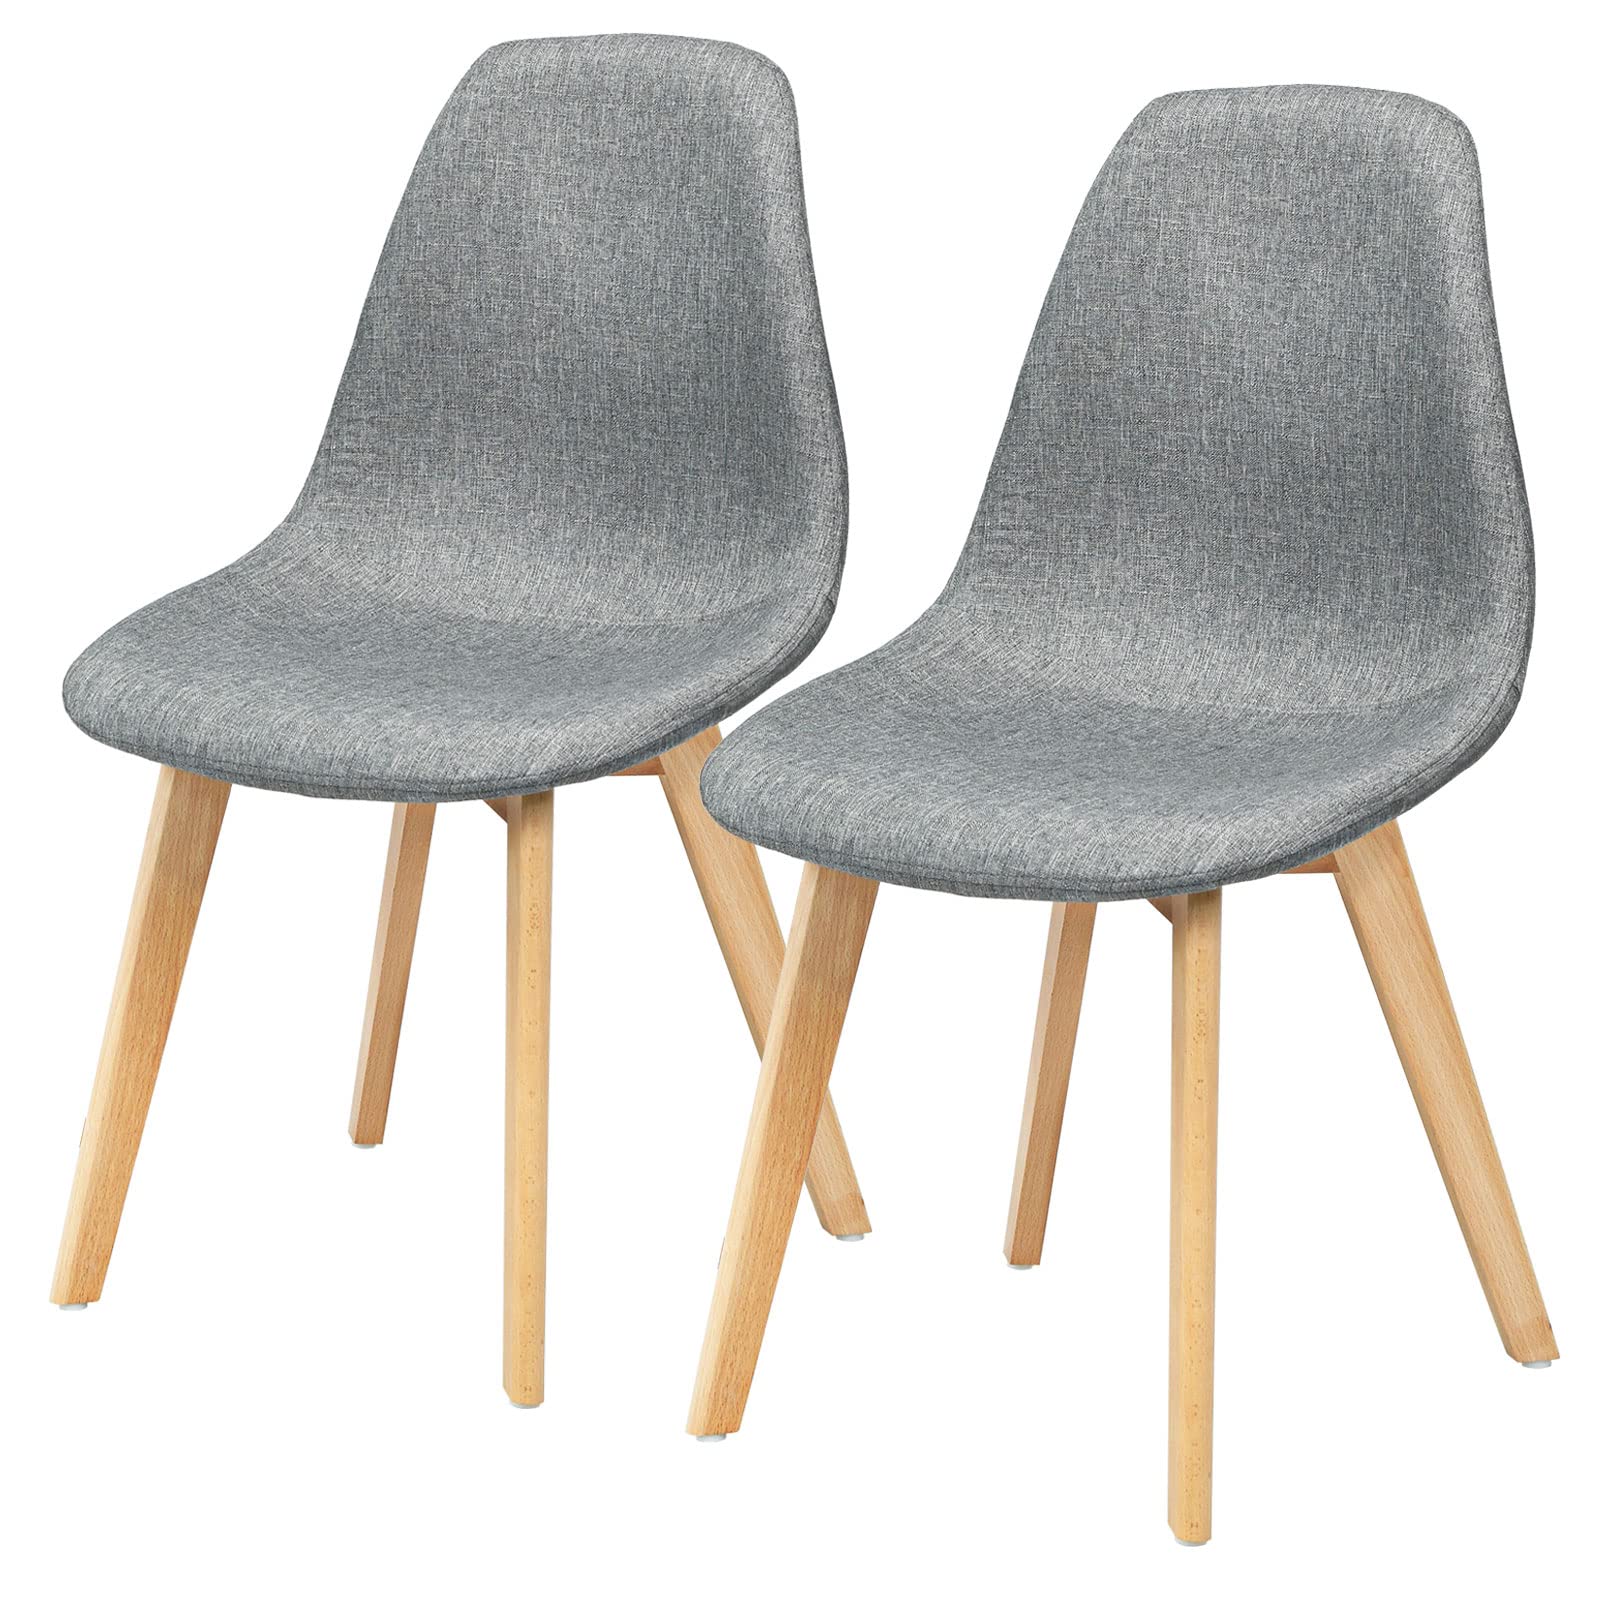 Set of 2 or 4 Kitchen Dining Chairs Gray